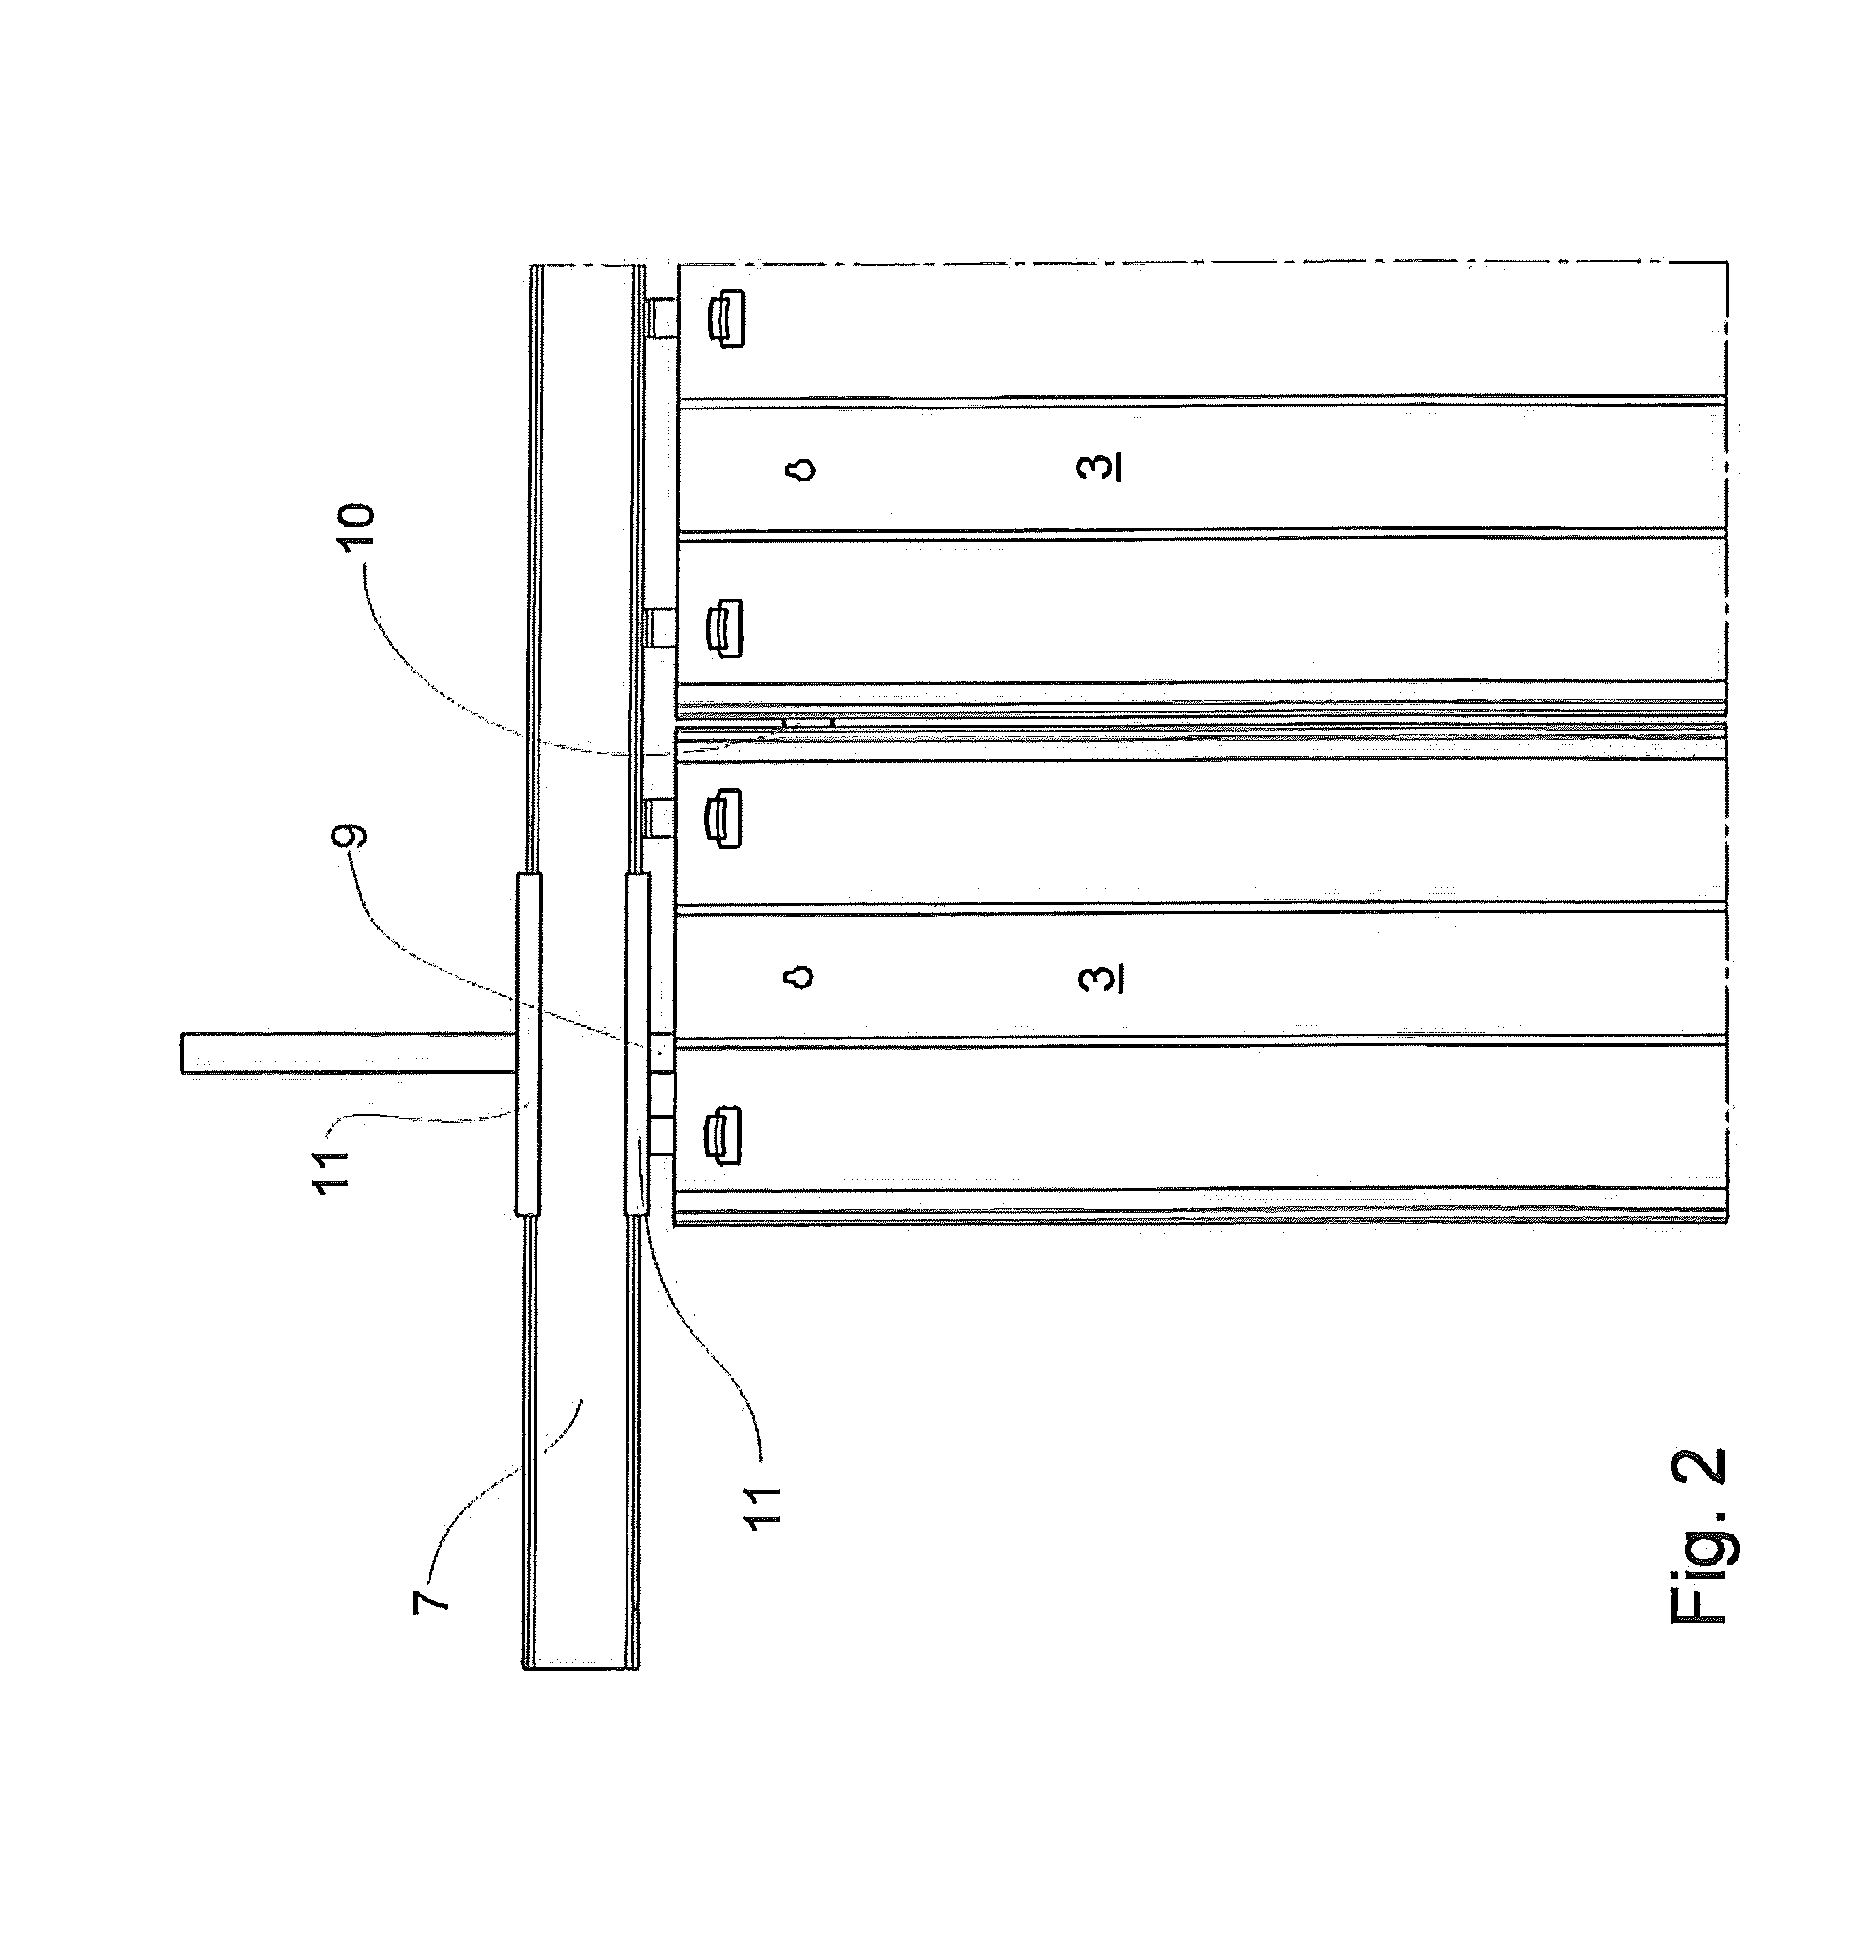 Electrical screening device for structures near high voltage parts of electrostatic precipitators